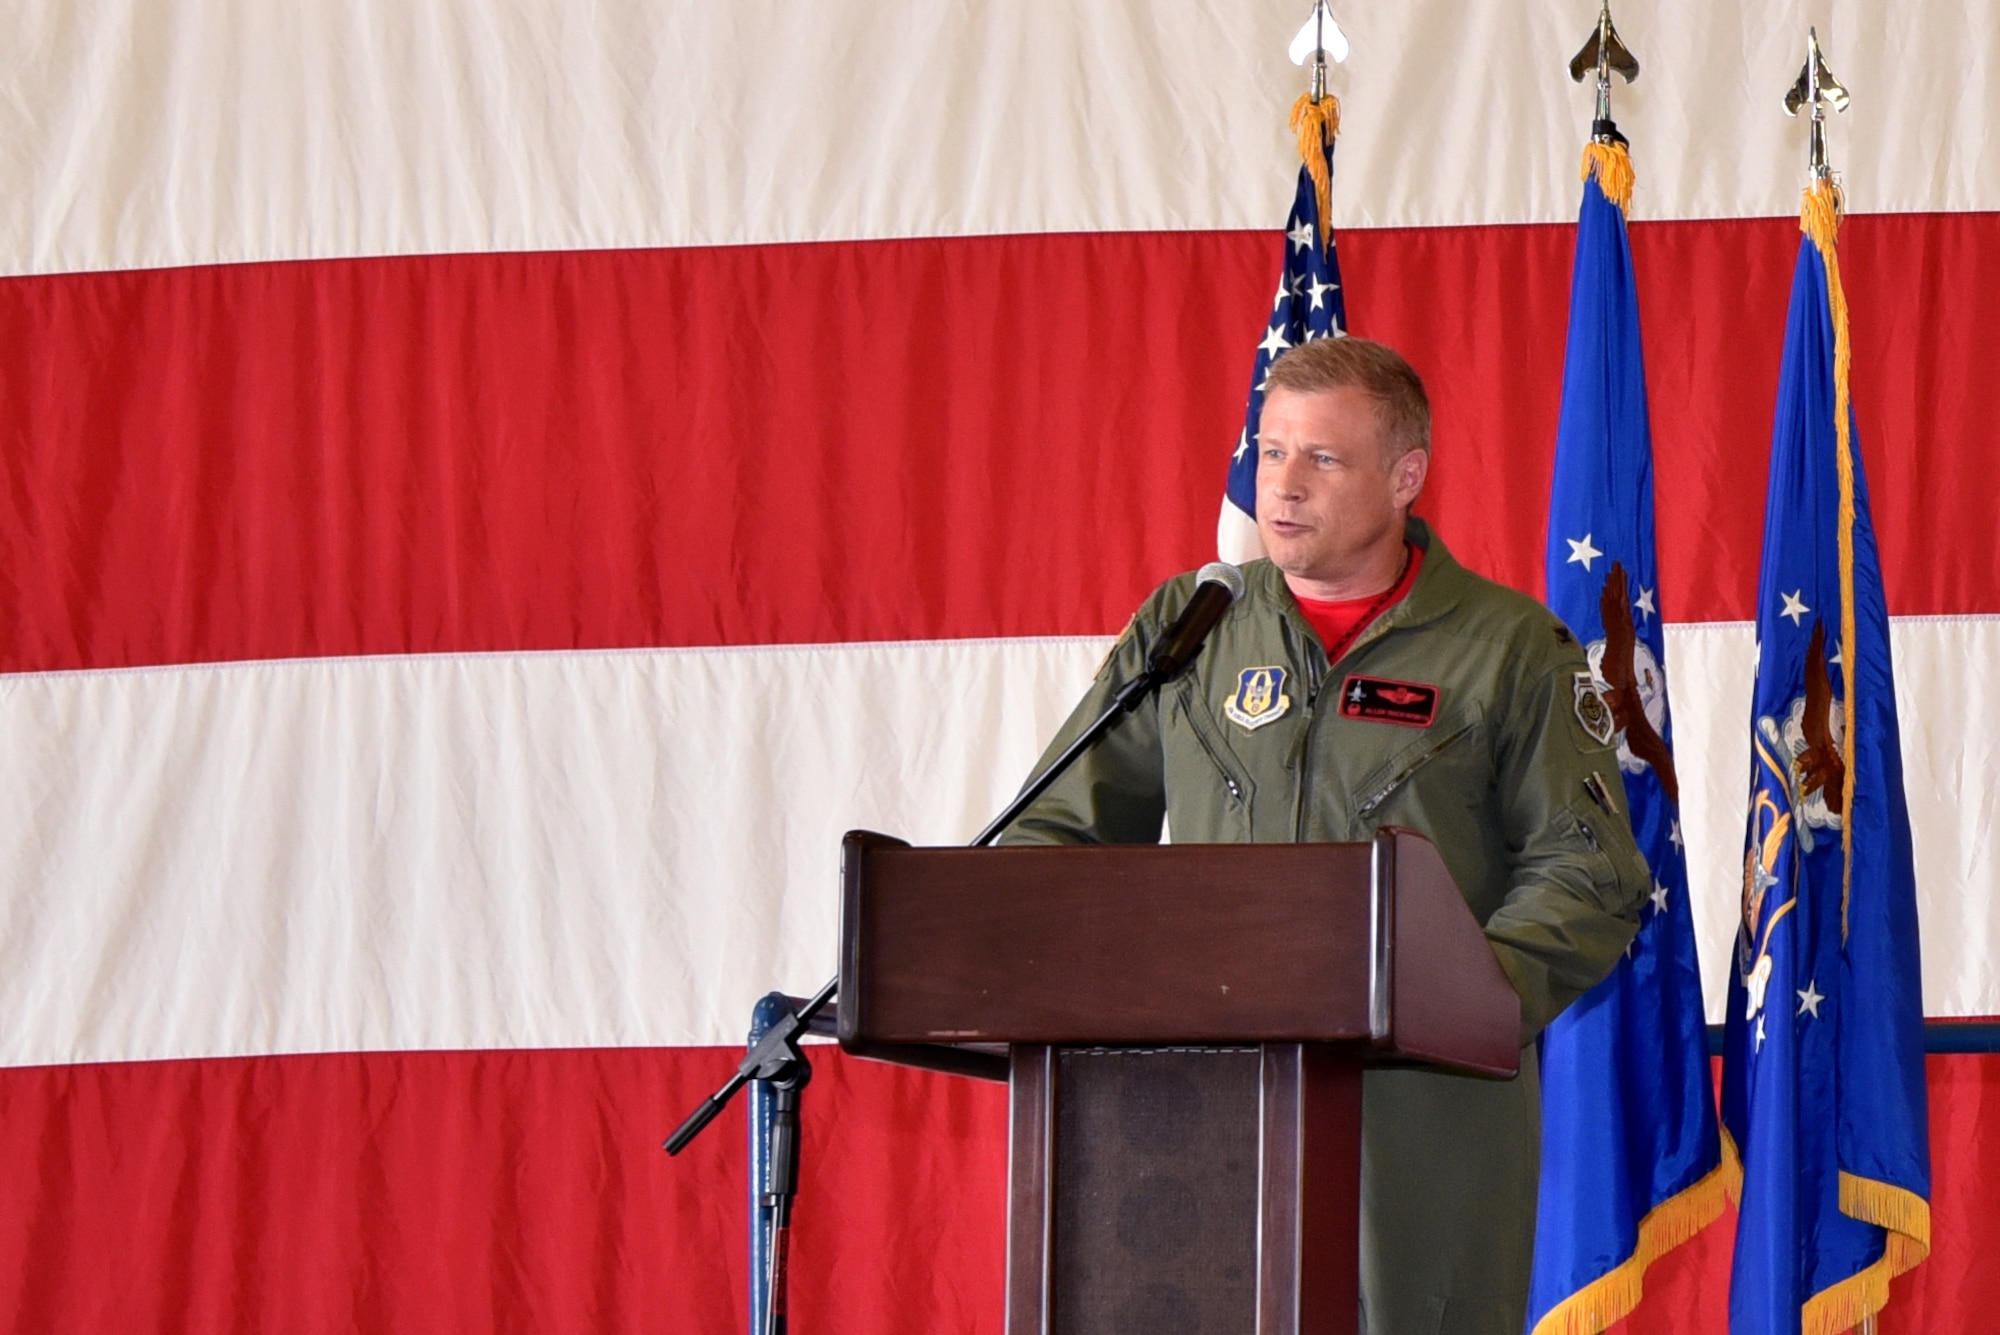 Col. Allen Duckworth, 301st Fighter Wing commander, presided over the 301st Fighter Wing Operations Group change of command ceremony, June 6, 2021, at U.S. Naval Air Station Joint Reserve Base Fort Worth, Texas. Duckworth welcomed Col. Benjamin Harrison as the new 301 FW OG commander. (U.S. Air Force photo by Staff Sgt. Randall Moose)